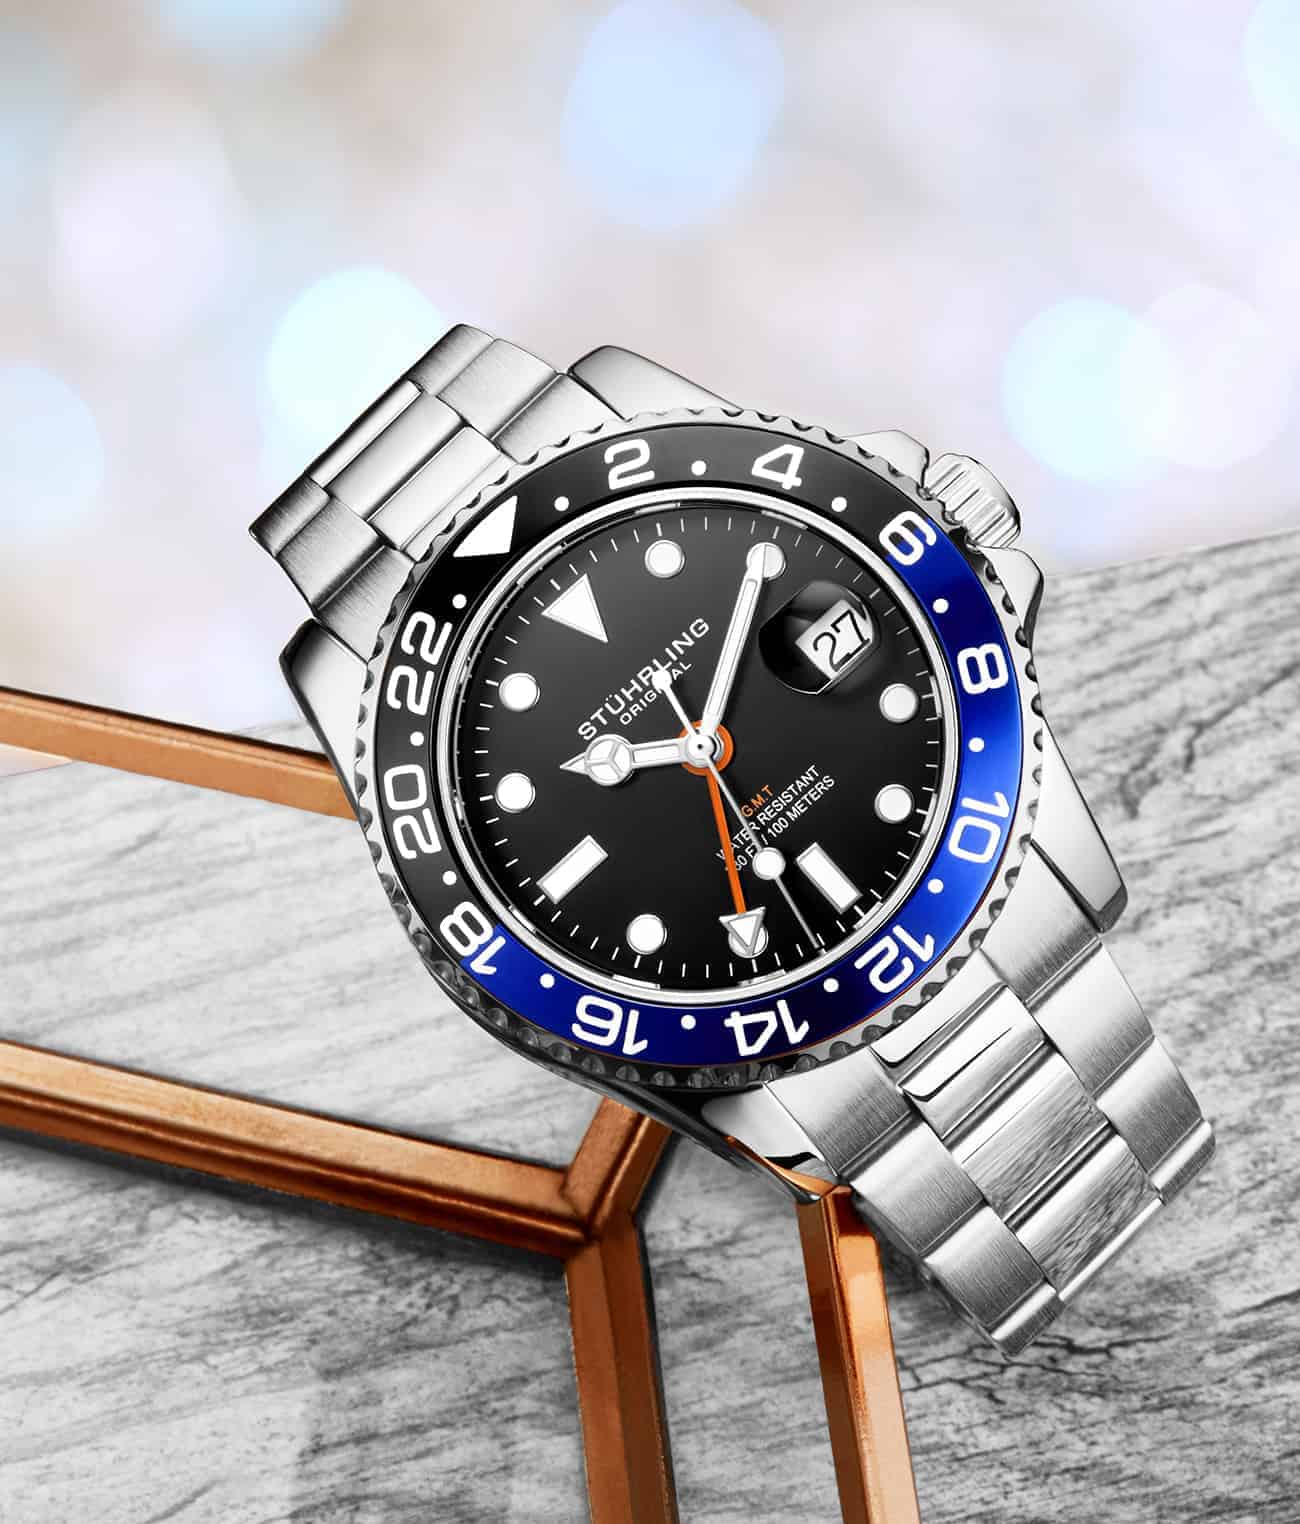 Diver + Dress Watch Set with Signature Pen and Stud Earring